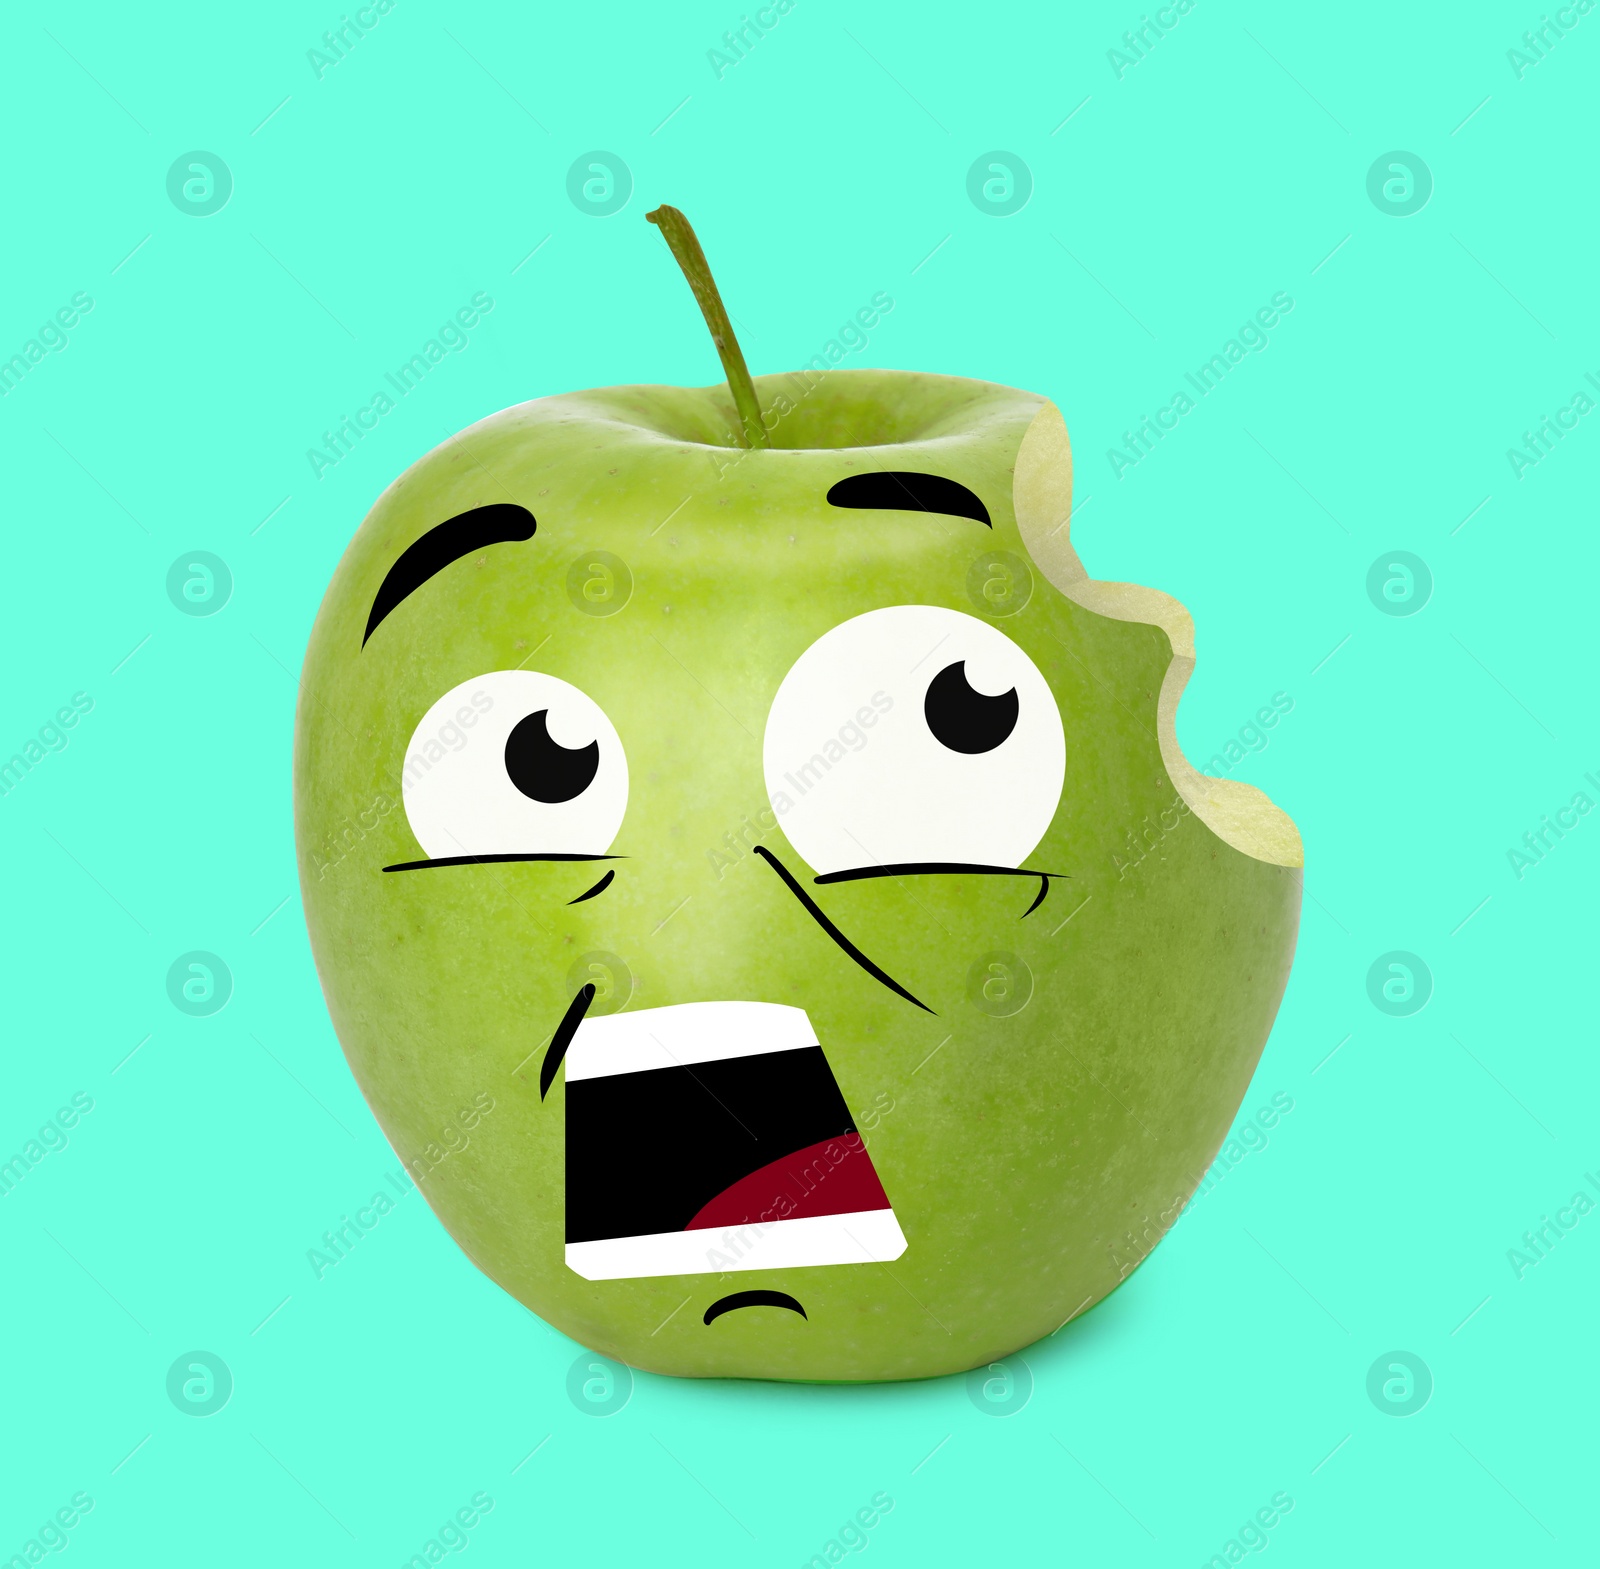 Image of Creative artwork. Emotional green bitten apple. Fruit with drawings on mint color background